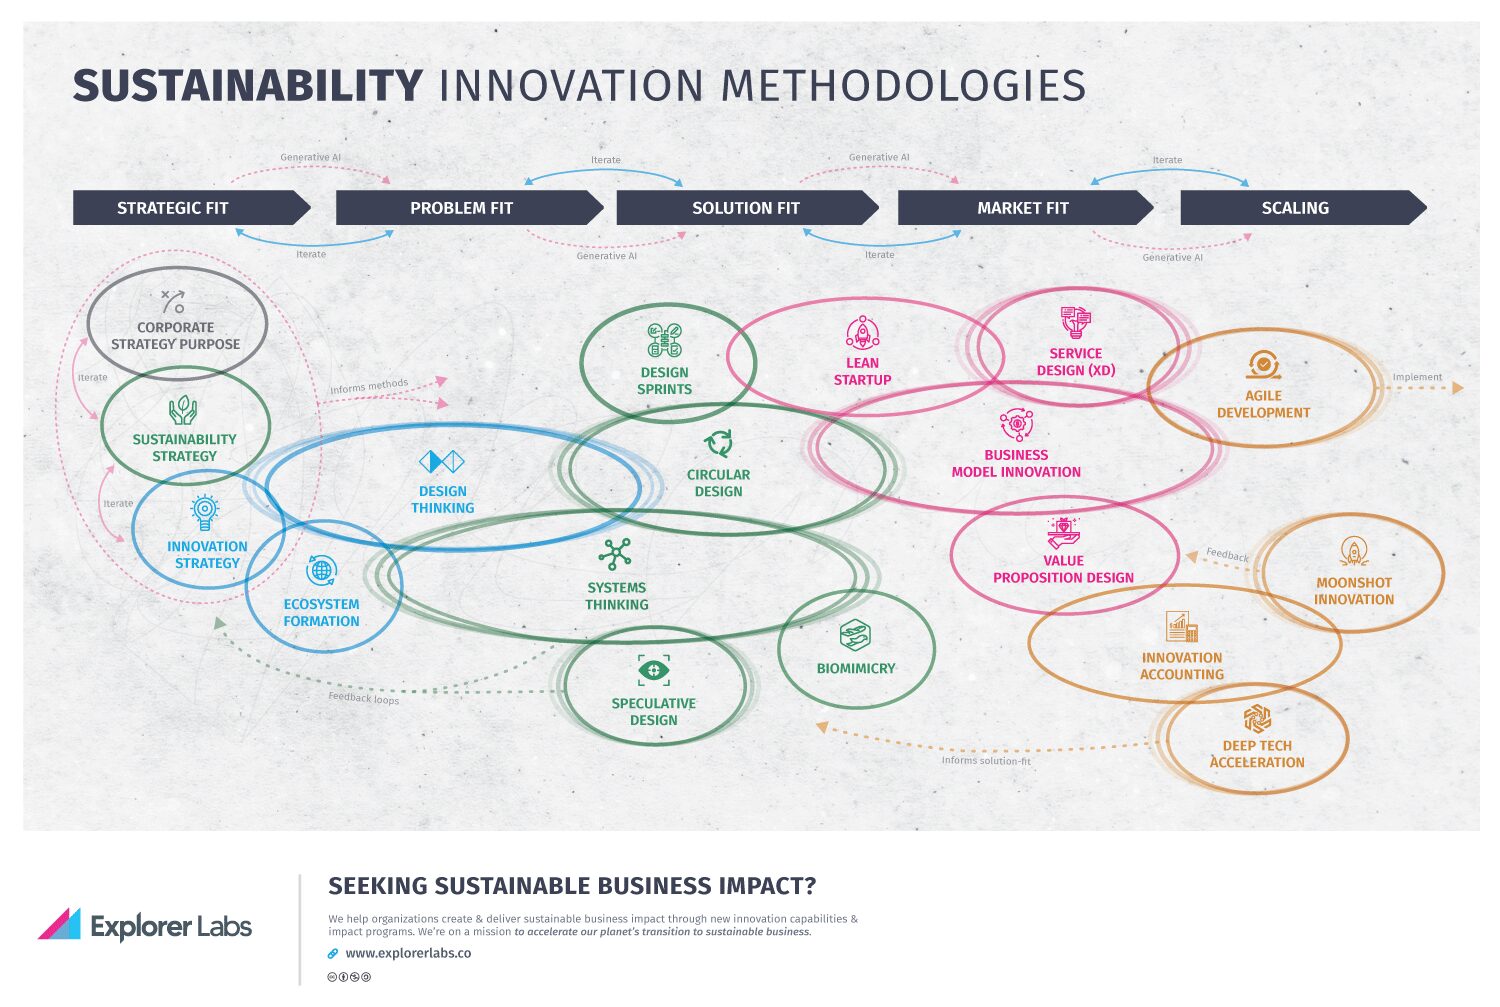 Overview of 18 sustainability innovation methodologies in an overview diagram and how the methods overlap at which stage of the innovation and business design process.